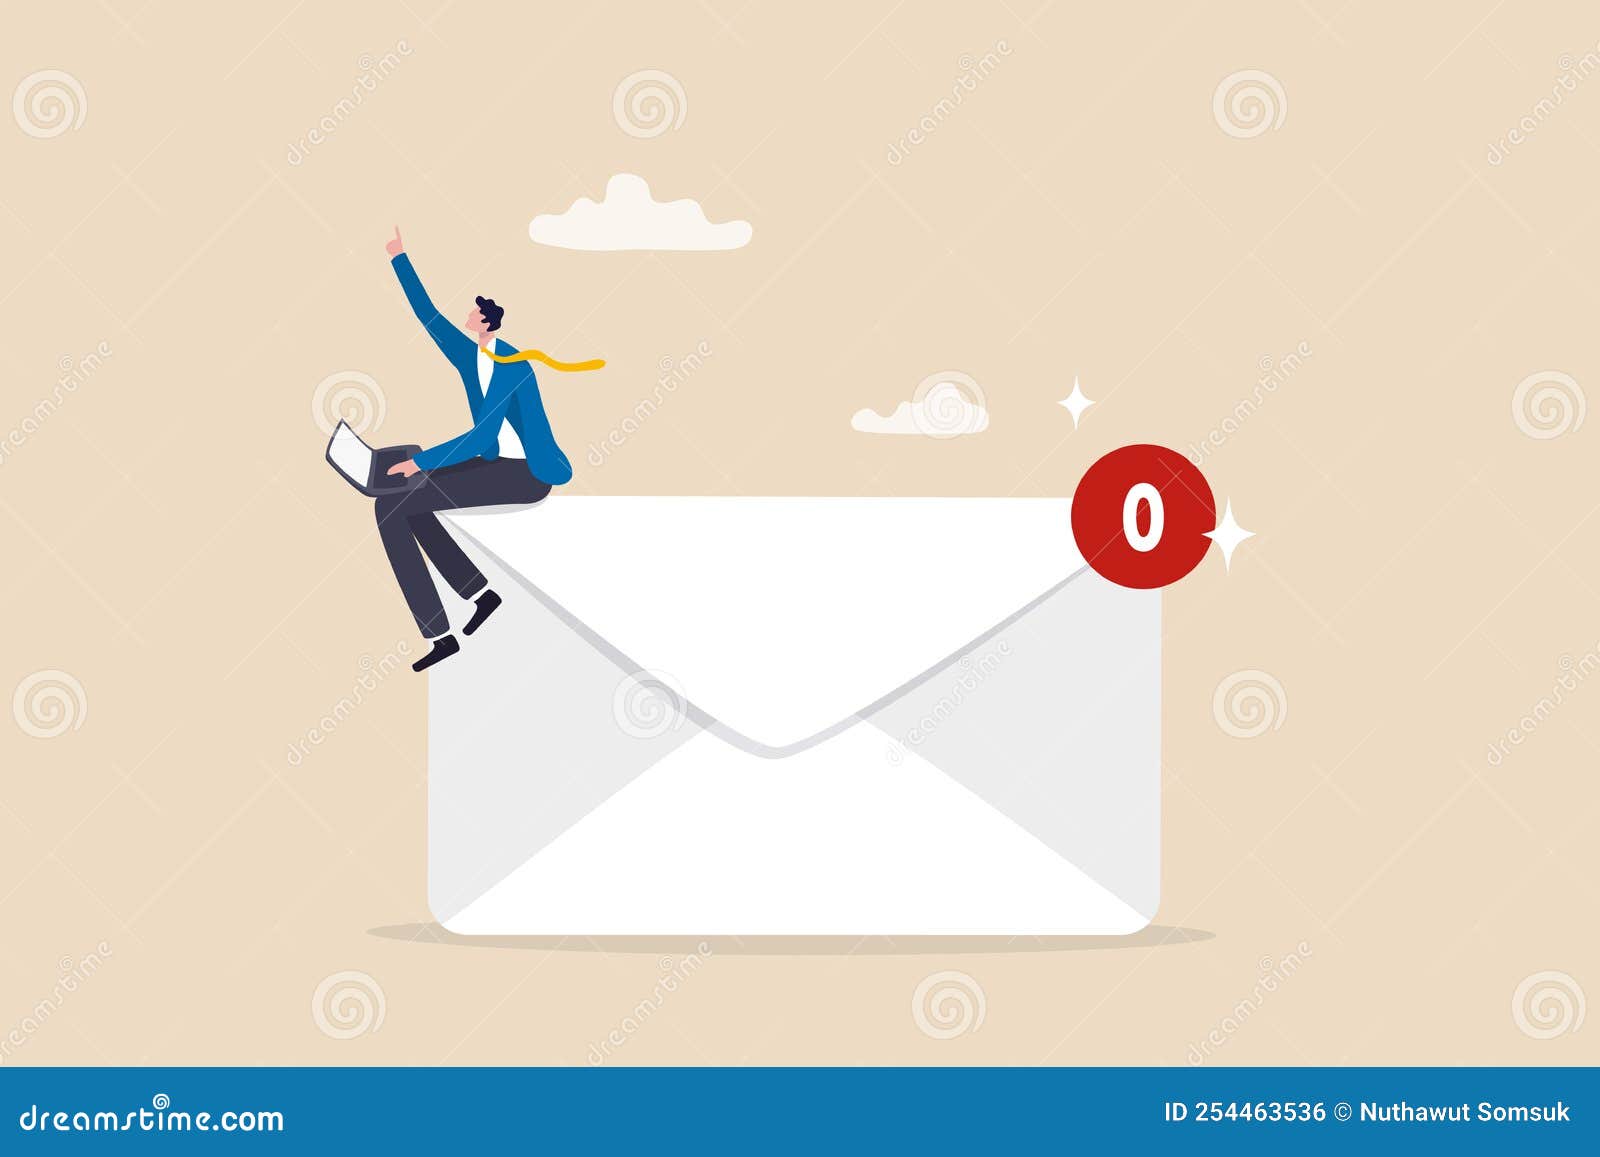 email management, handle many emails or manage to reply all emails, efficiency or productive way, prioritize or categorize